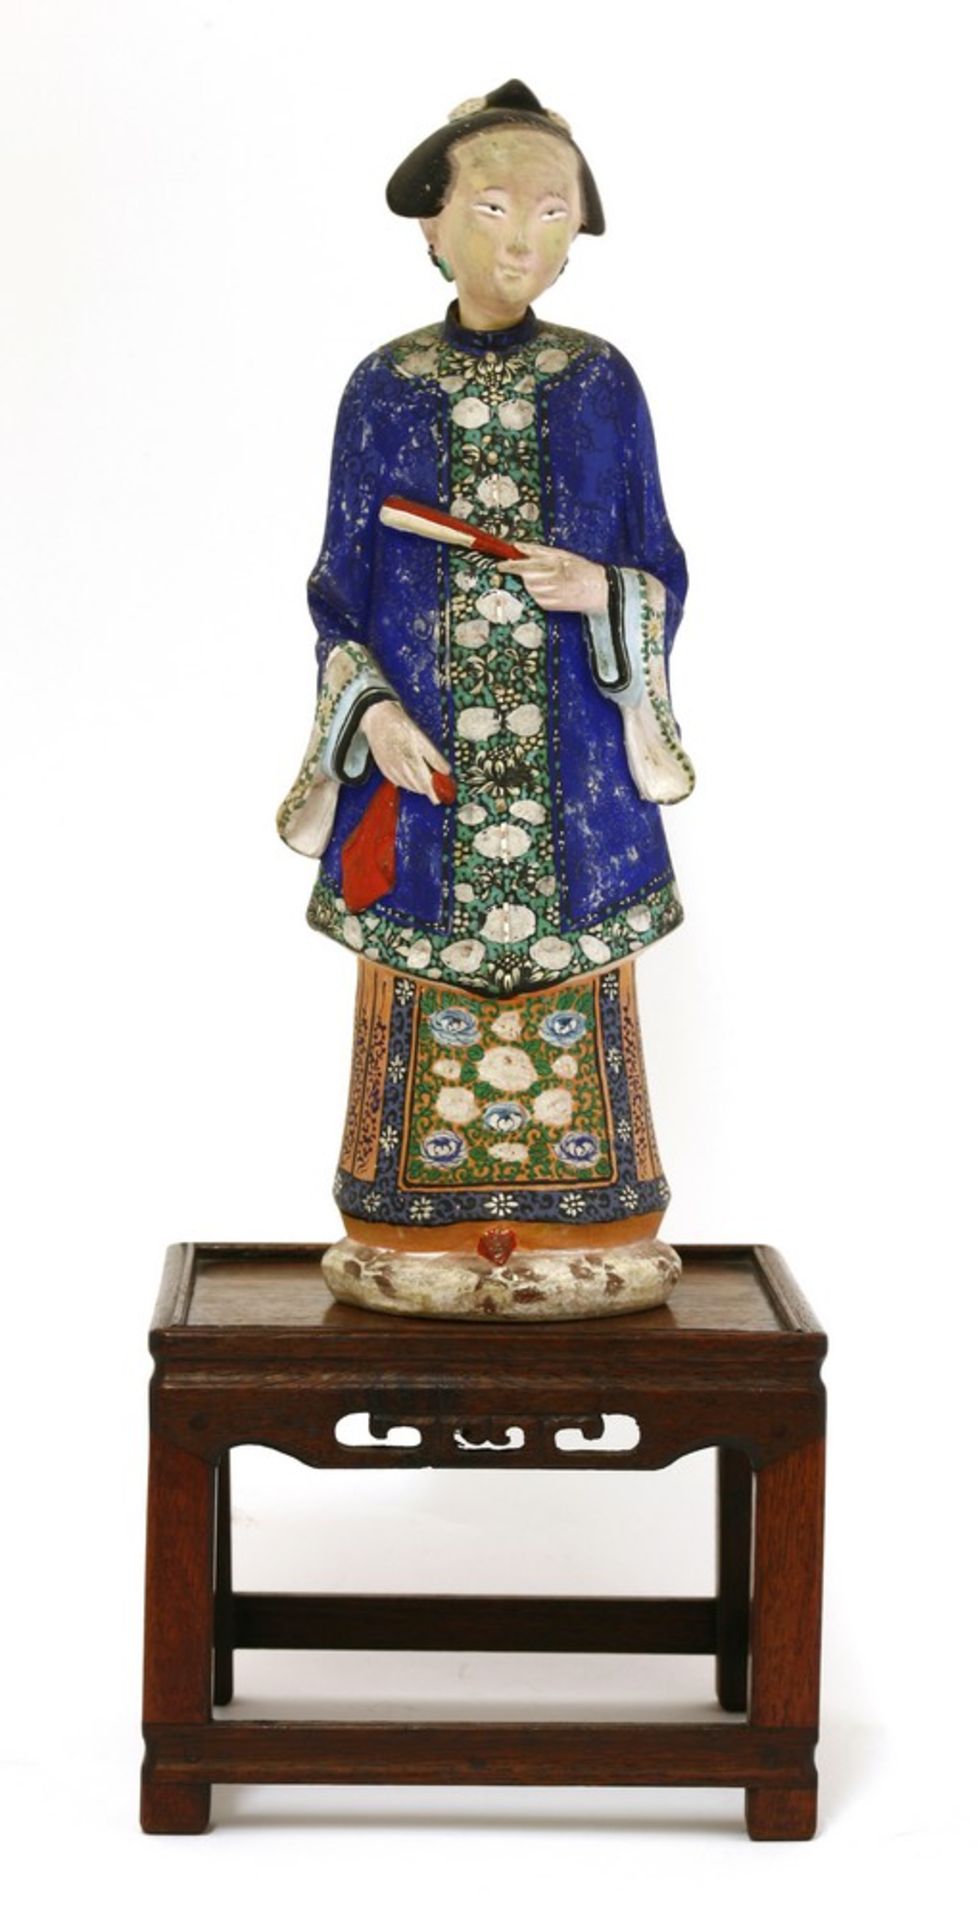 A Chinese painted clay nodding-head figure